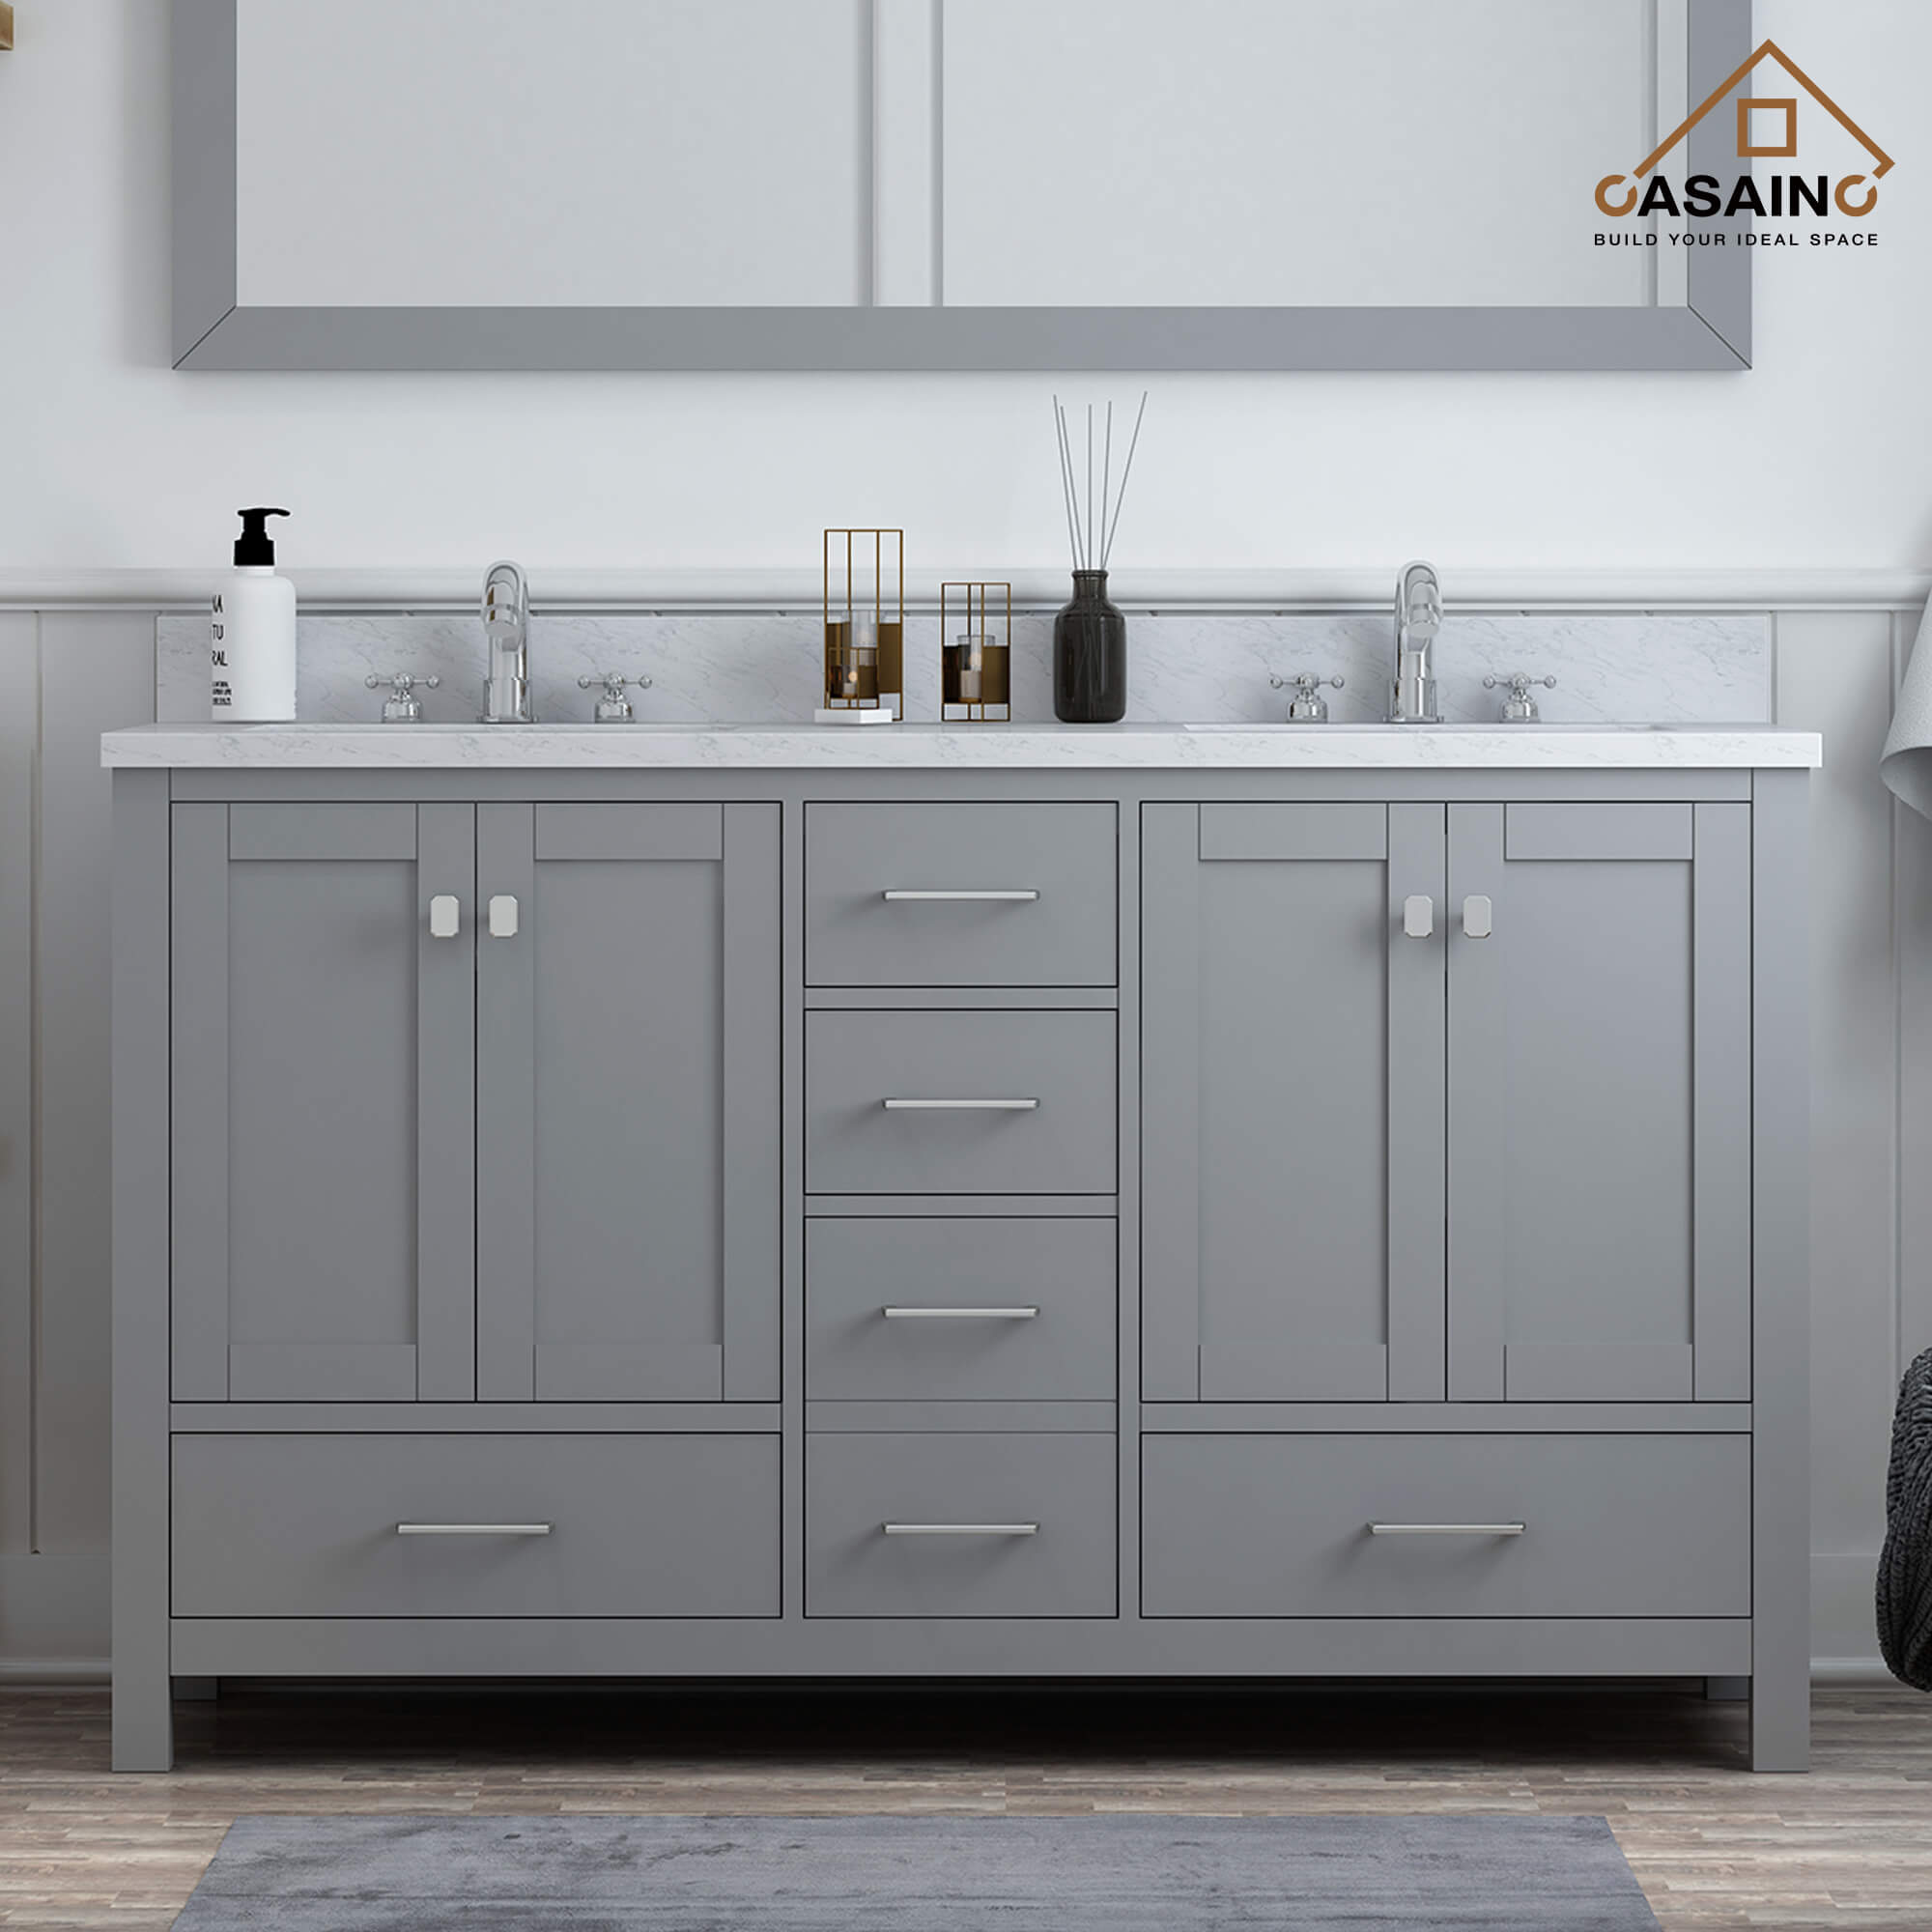 CASAINC 60 x 22 x 35.4 in. Solid Wood Bath Vanity with Carrara White Marble Countertop in Gray/White (No/With Mirror)